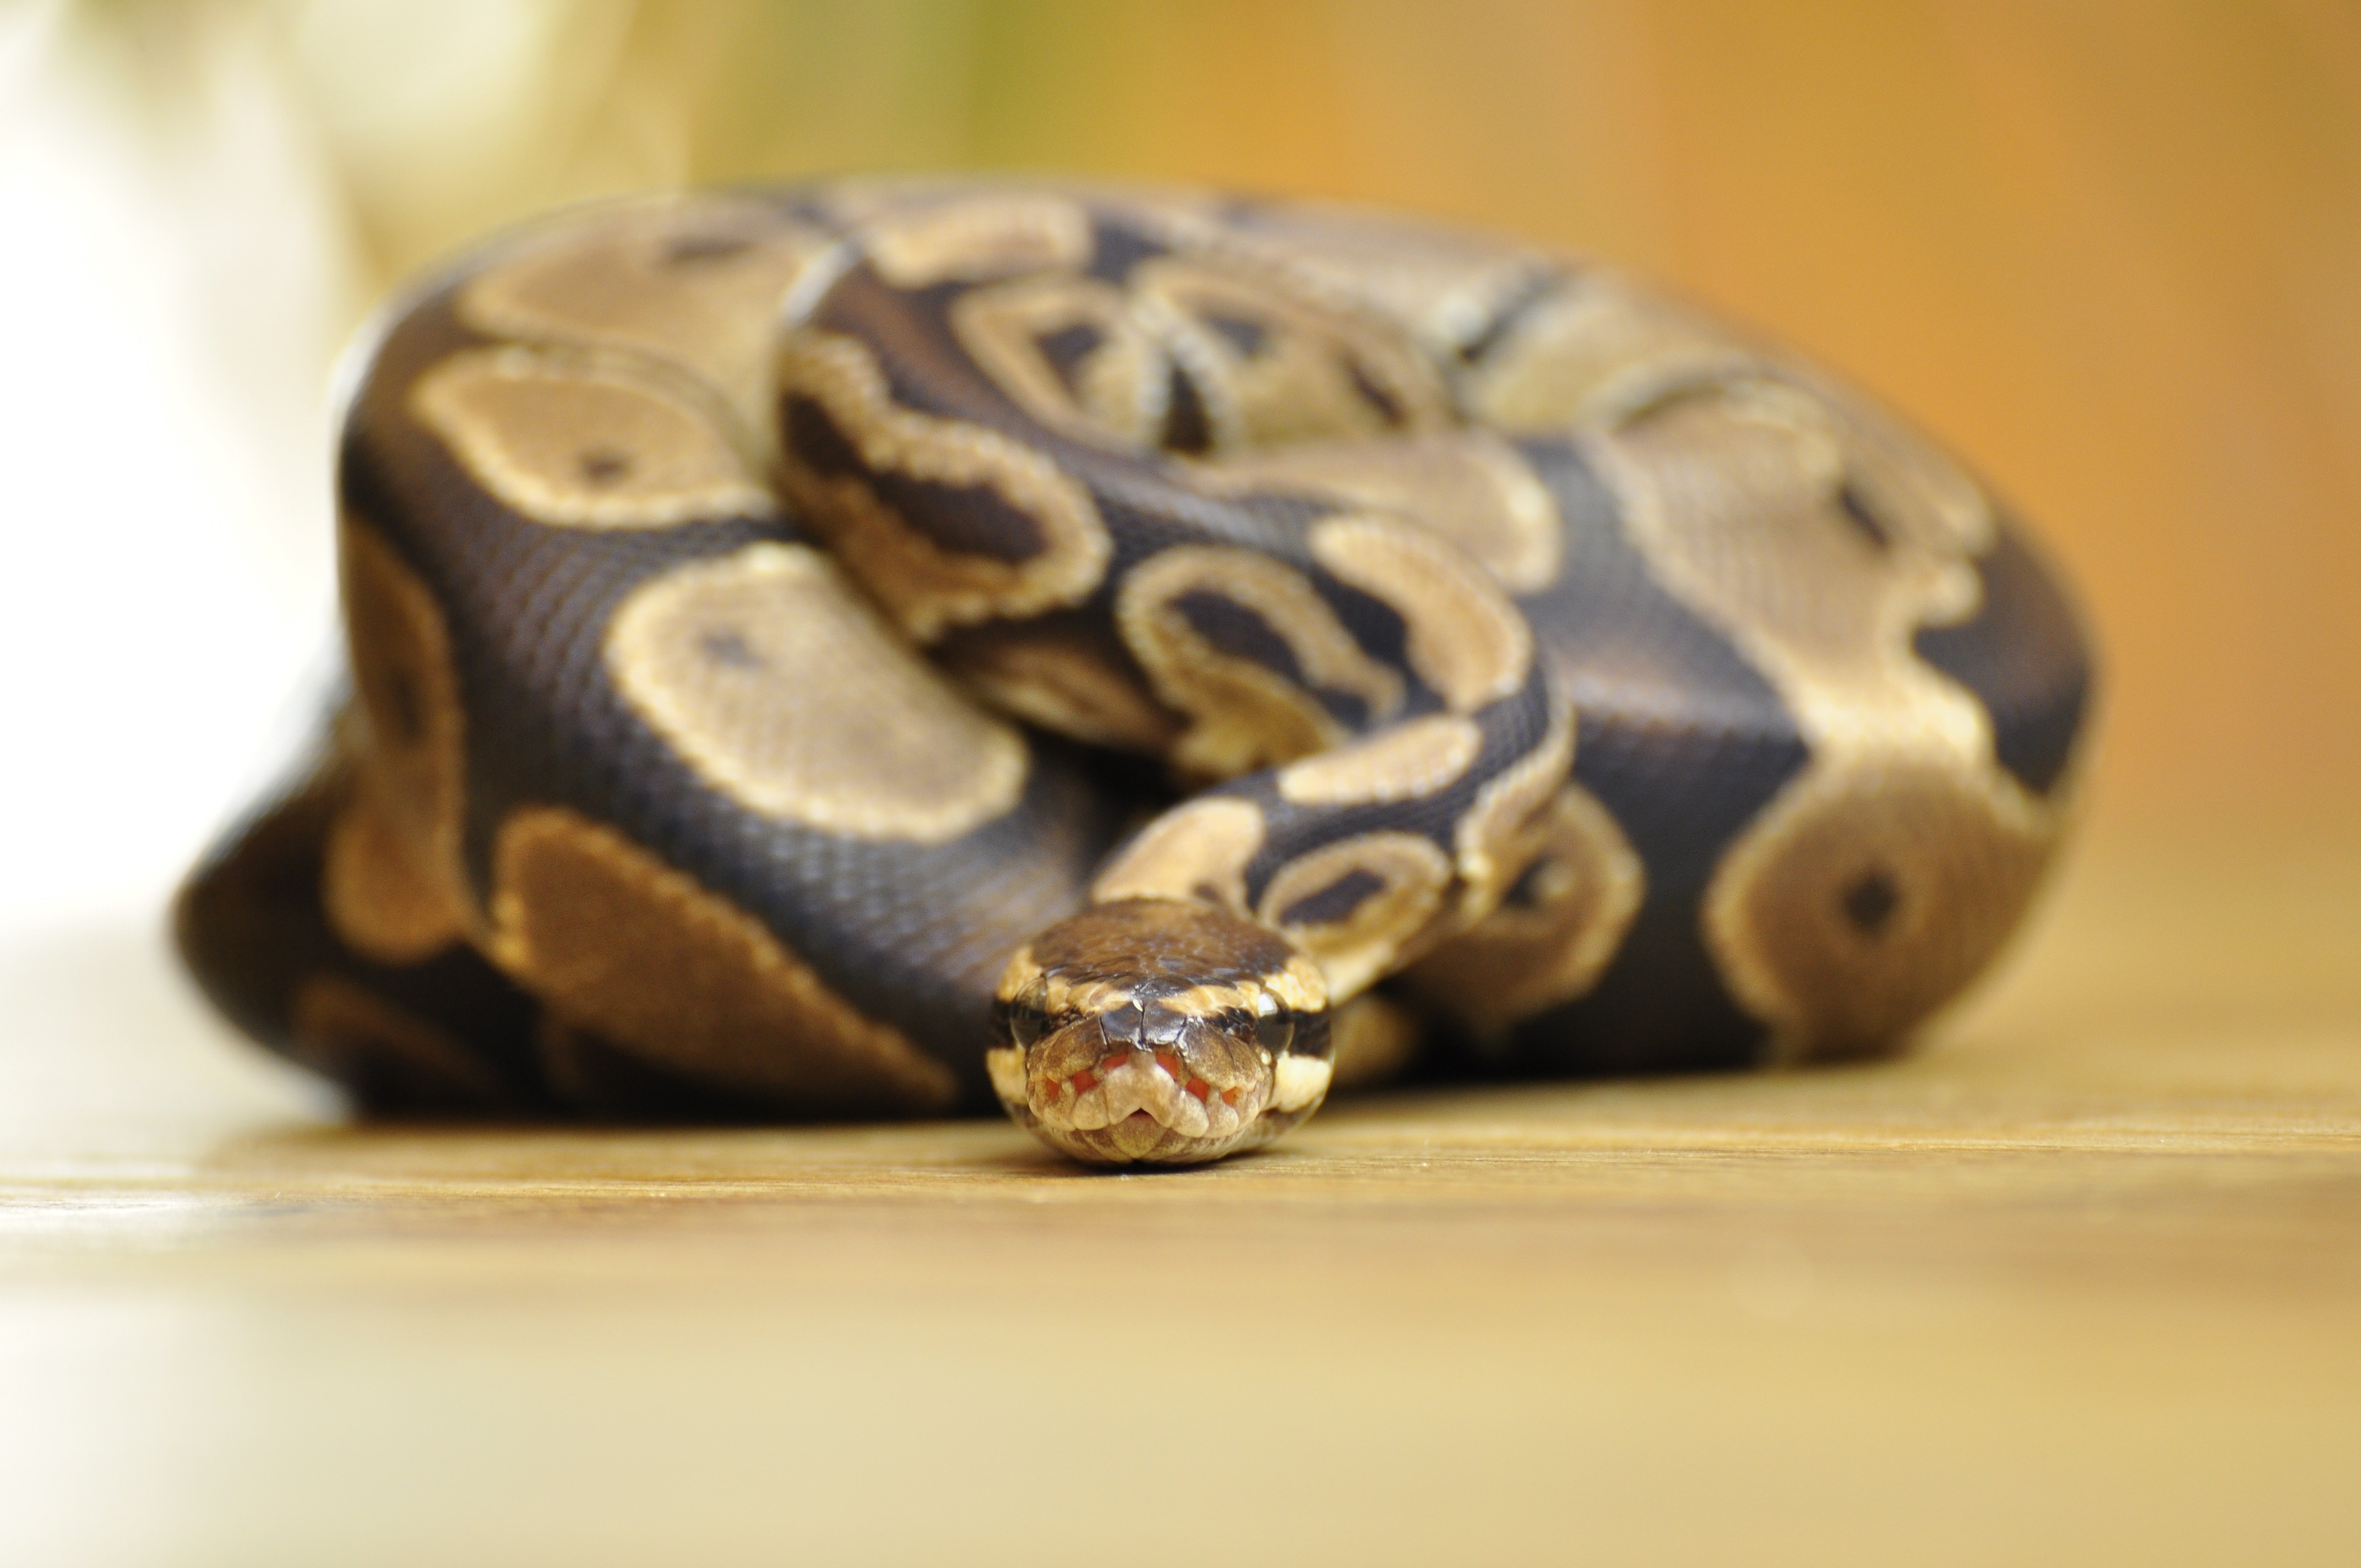 Ball Python, Snake, Constrictor, Scale, reptile, one animal